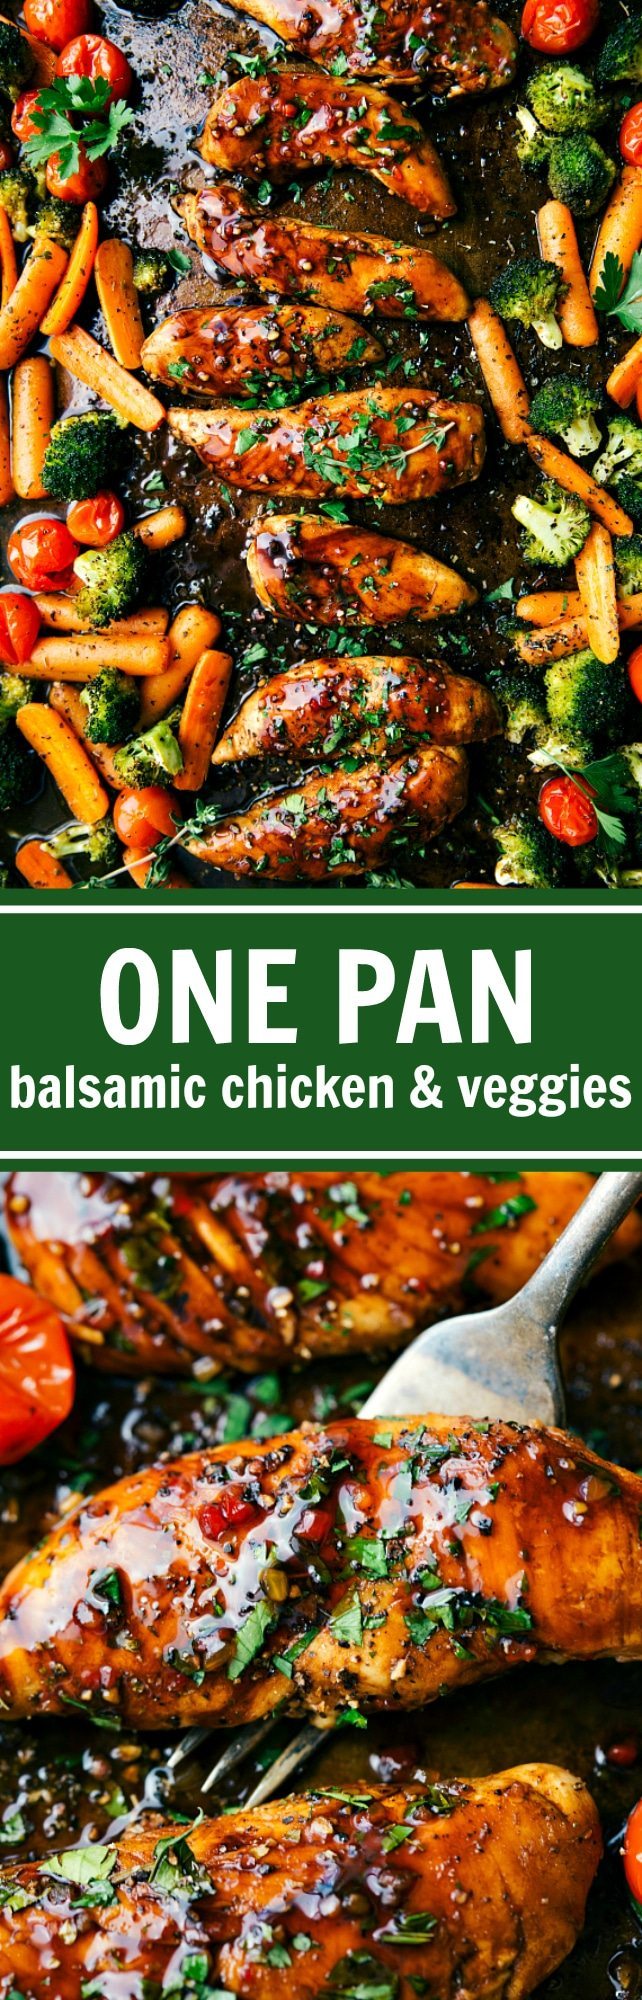 Sweet Balsamic chicken and veggies made in one pan. Ten minute prep and twenty minute cooking time -- this meal is efficient, healthy, and simple to make! via chelseasmessyapron.com